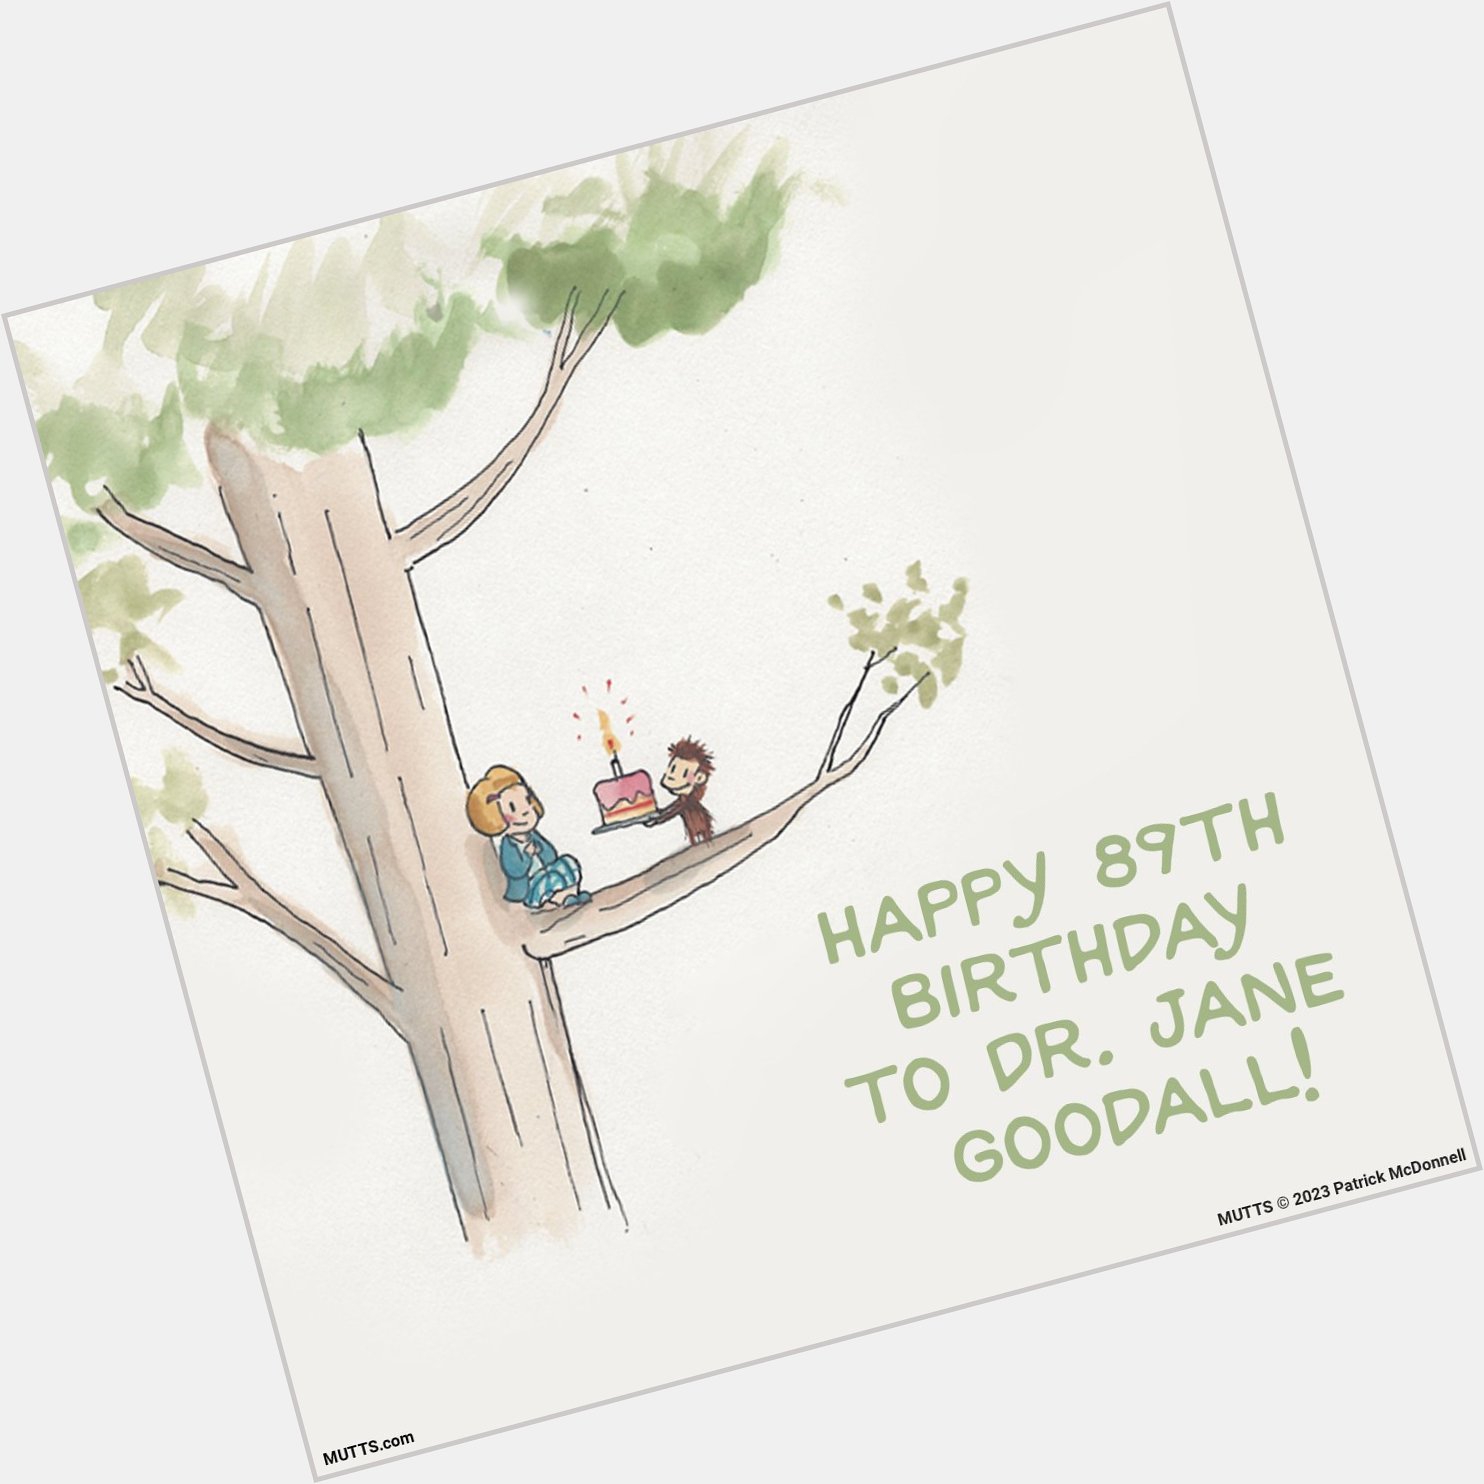 Happy birthday to Dr. Jane Goodall! Thank you for inspiring us to be kind, curious, and a friend to all animals. 